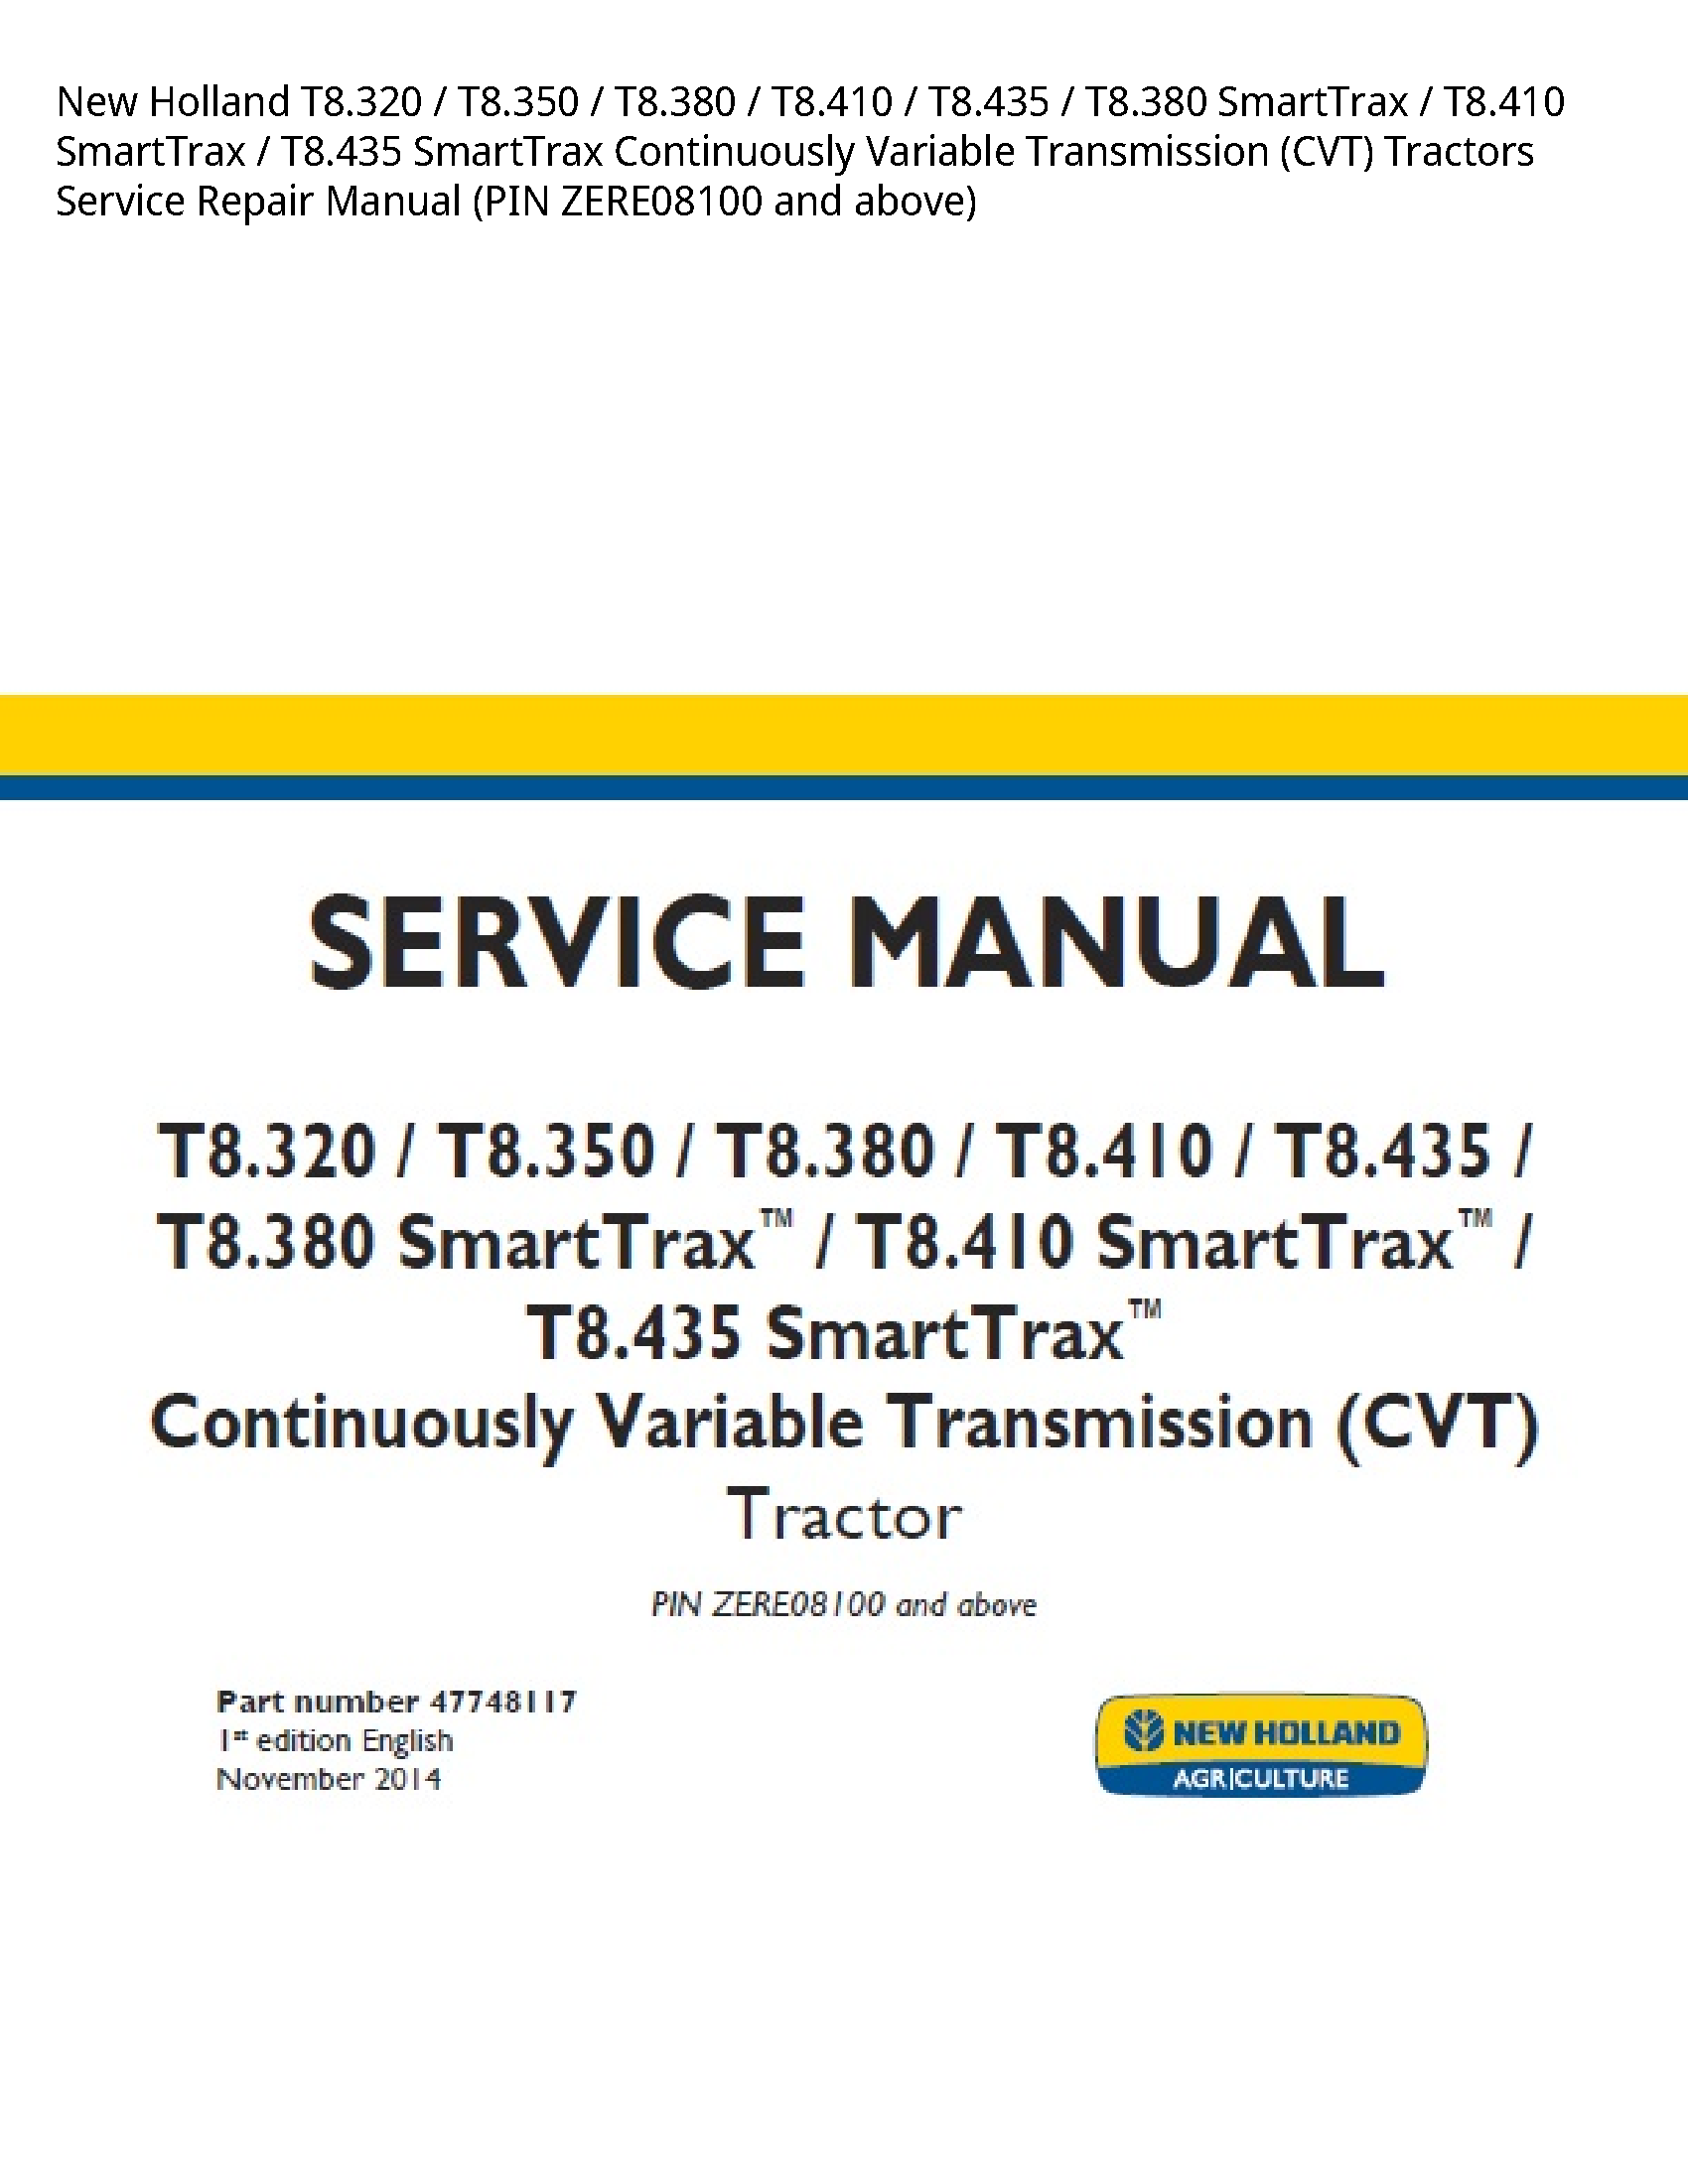 New Holland T8.320 SmartTrax SmartTrax SmartTrax Continuously Variable Transmission (CVT) Tractors manual